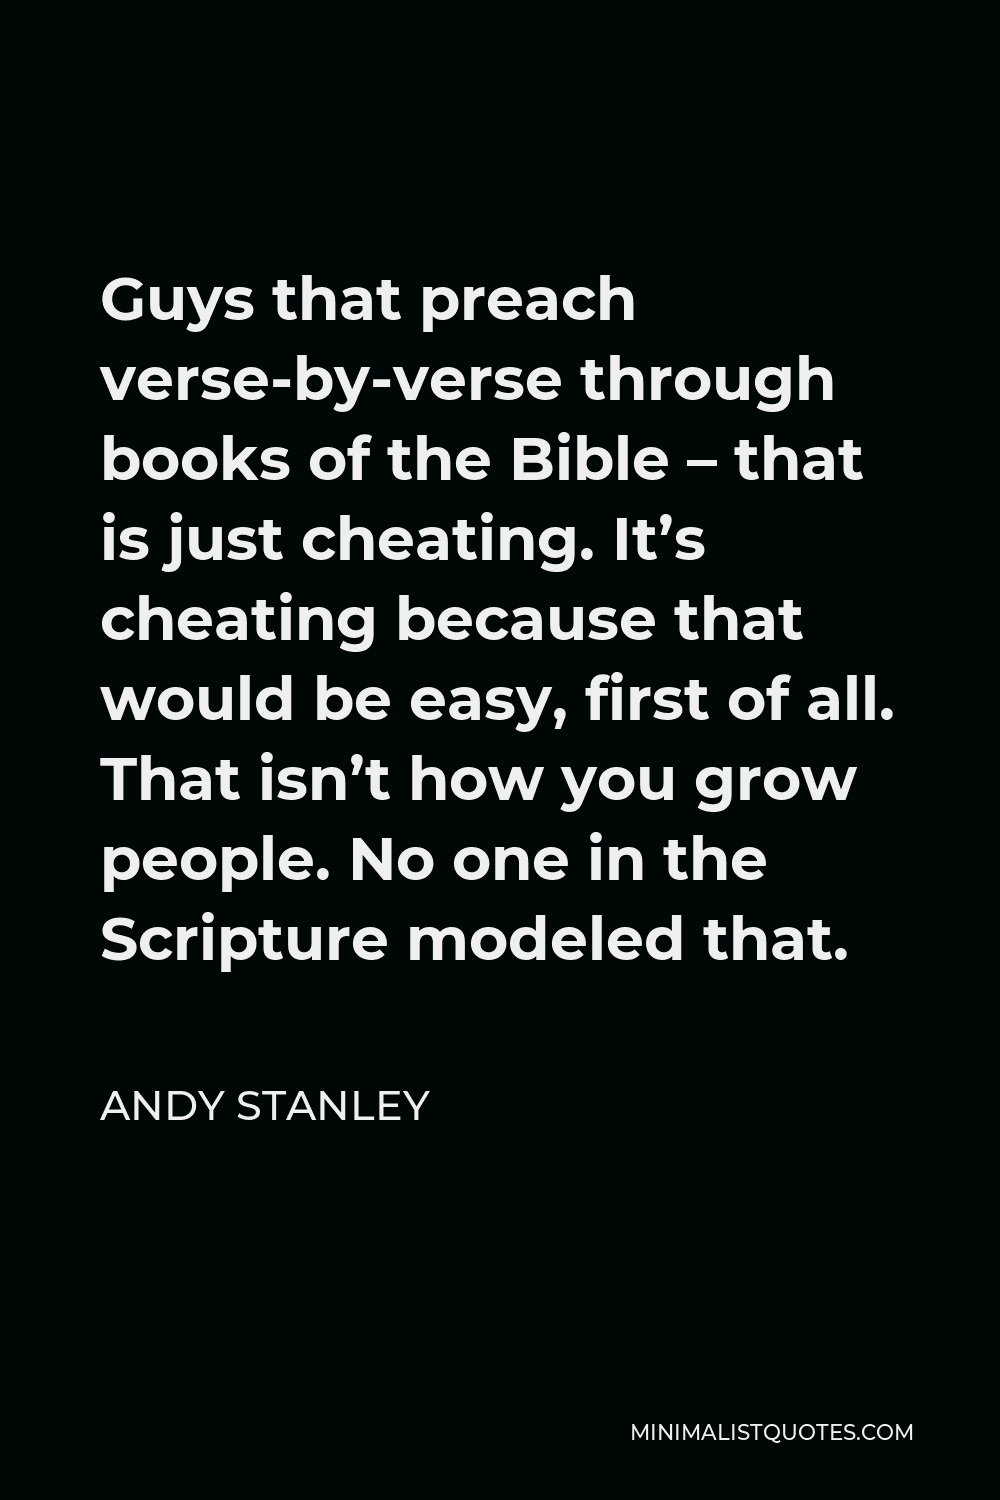 Andy Stanley Quote - Guys that preach verse-by-verse through books of the Bible – that is just cheating. It’s cheating because that would be easy, first of all. That isn’t how you grow people. No one in the Scripture modeled that.